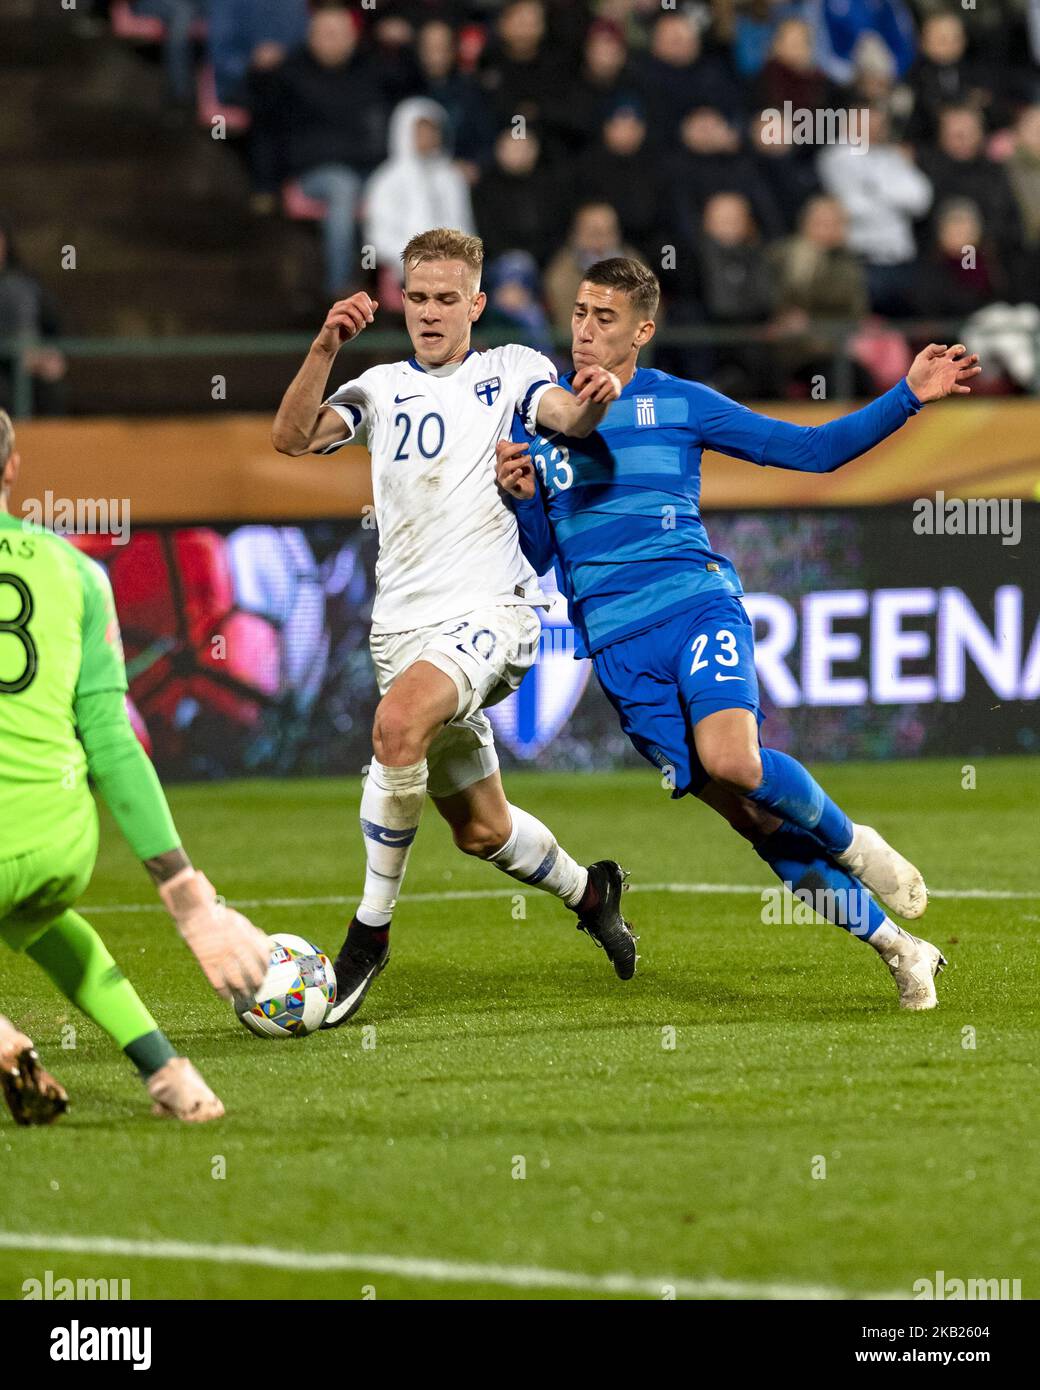 KÅstas Tsimikas (#23) of Greece and Jasse Tuominen of Finland vie for the ball during the UEFA Nations League group stage football match Finland v Grece in Tampere, Finland on October 15, 2018. (Photo by Antti Yrjonen/NurPhoto) Stock Photo